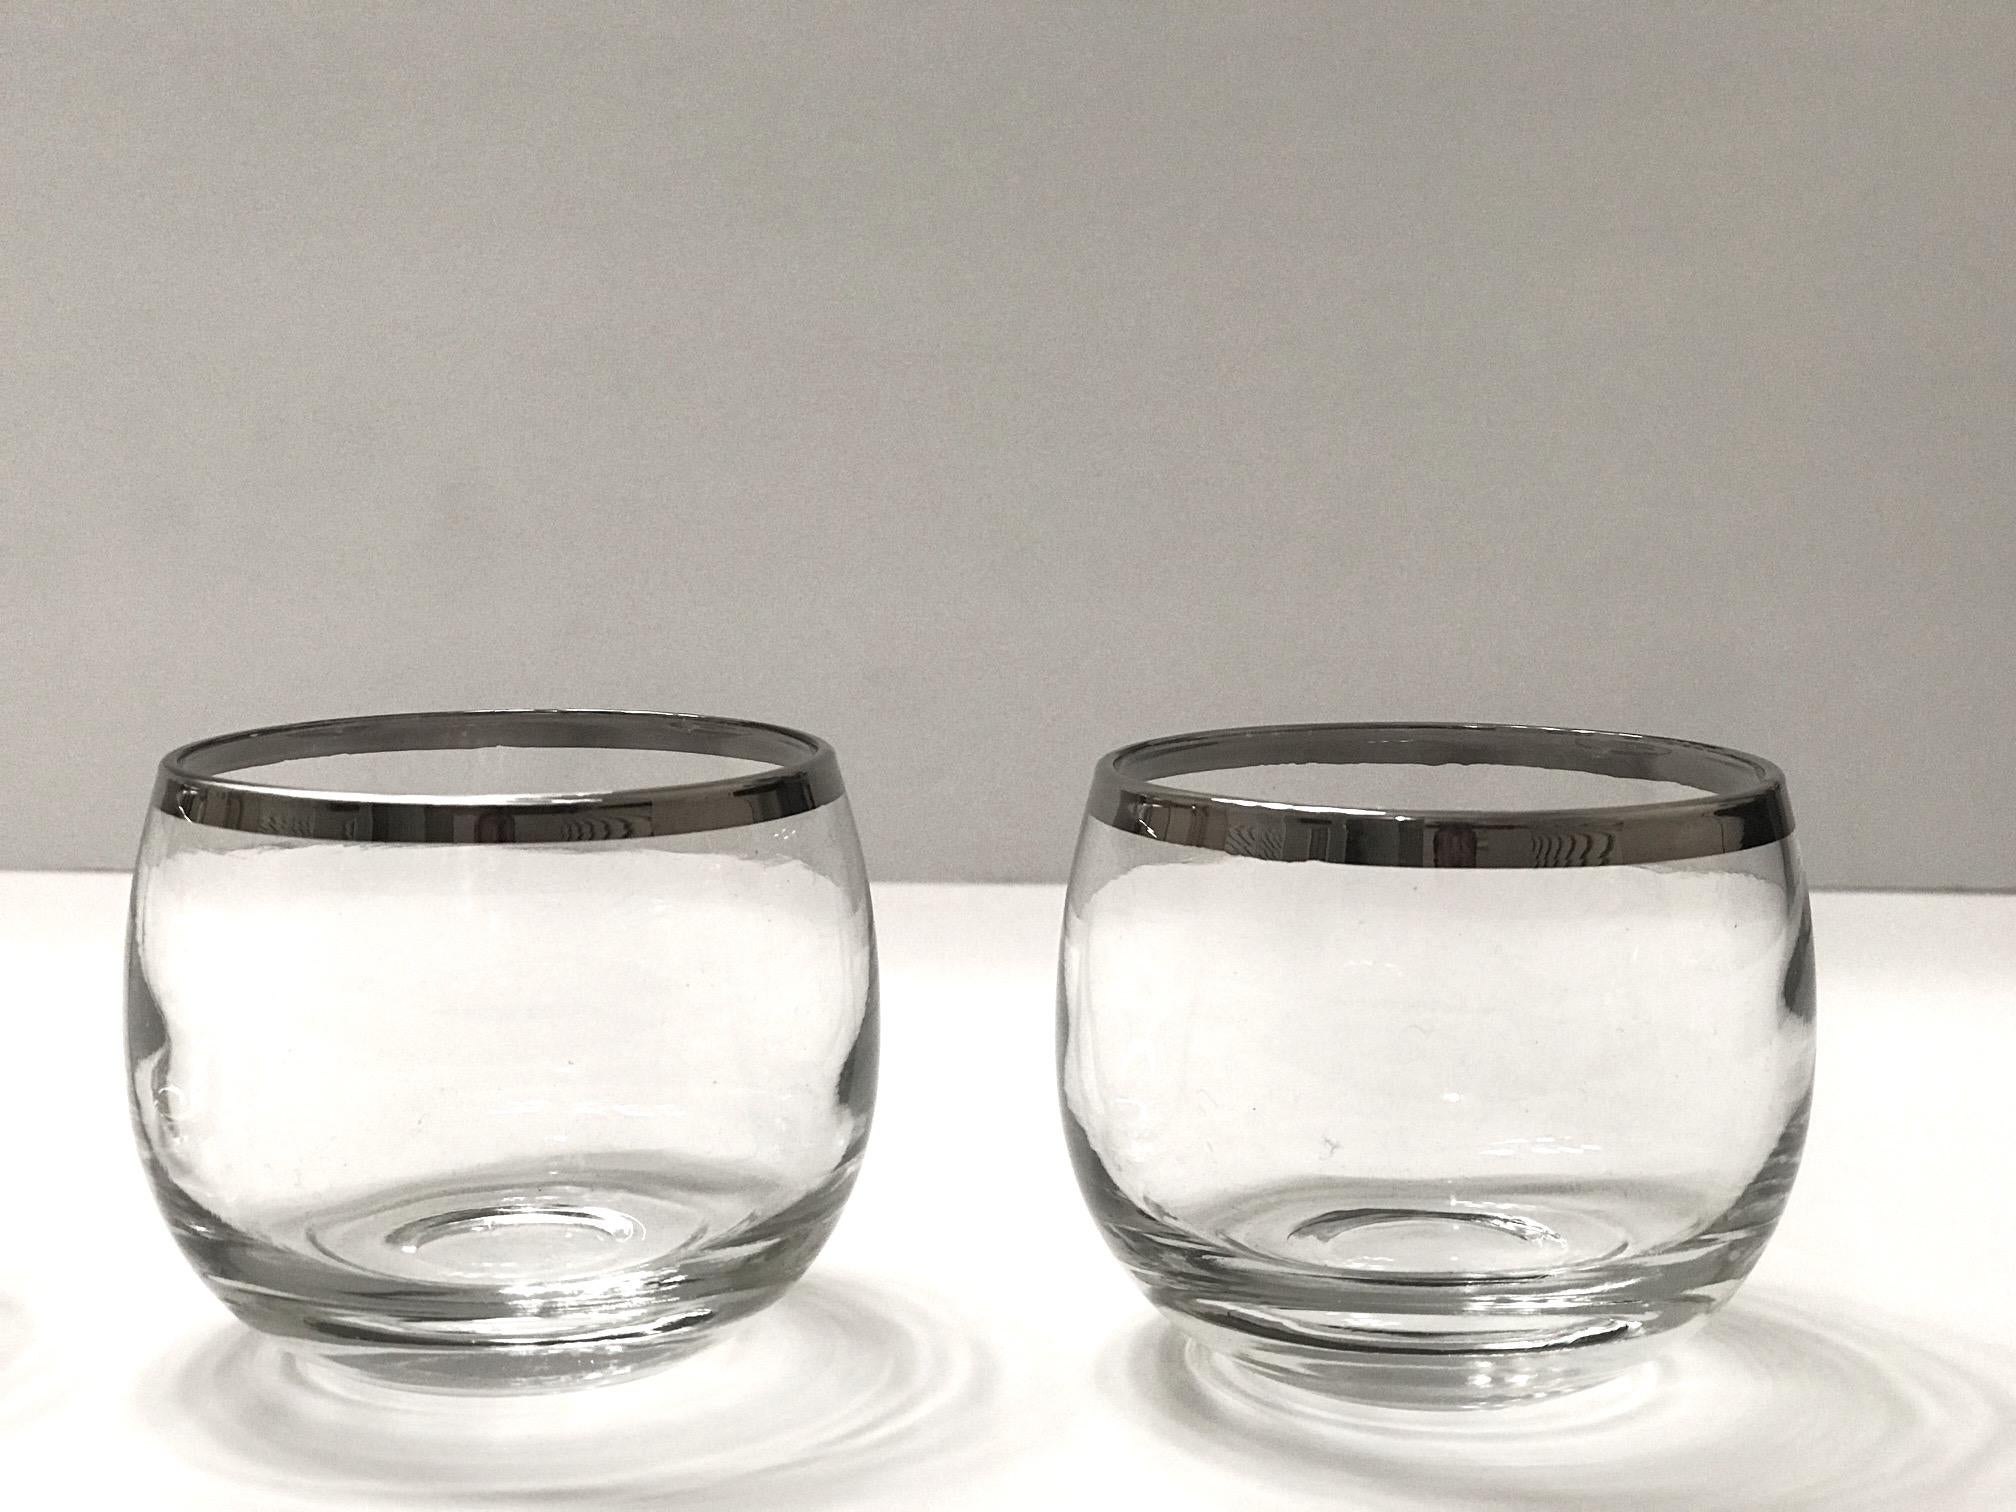 Mid-20th Century Midcentury Barware Glass Set with Sterling Silver Overlay by Dorothy Thorpe